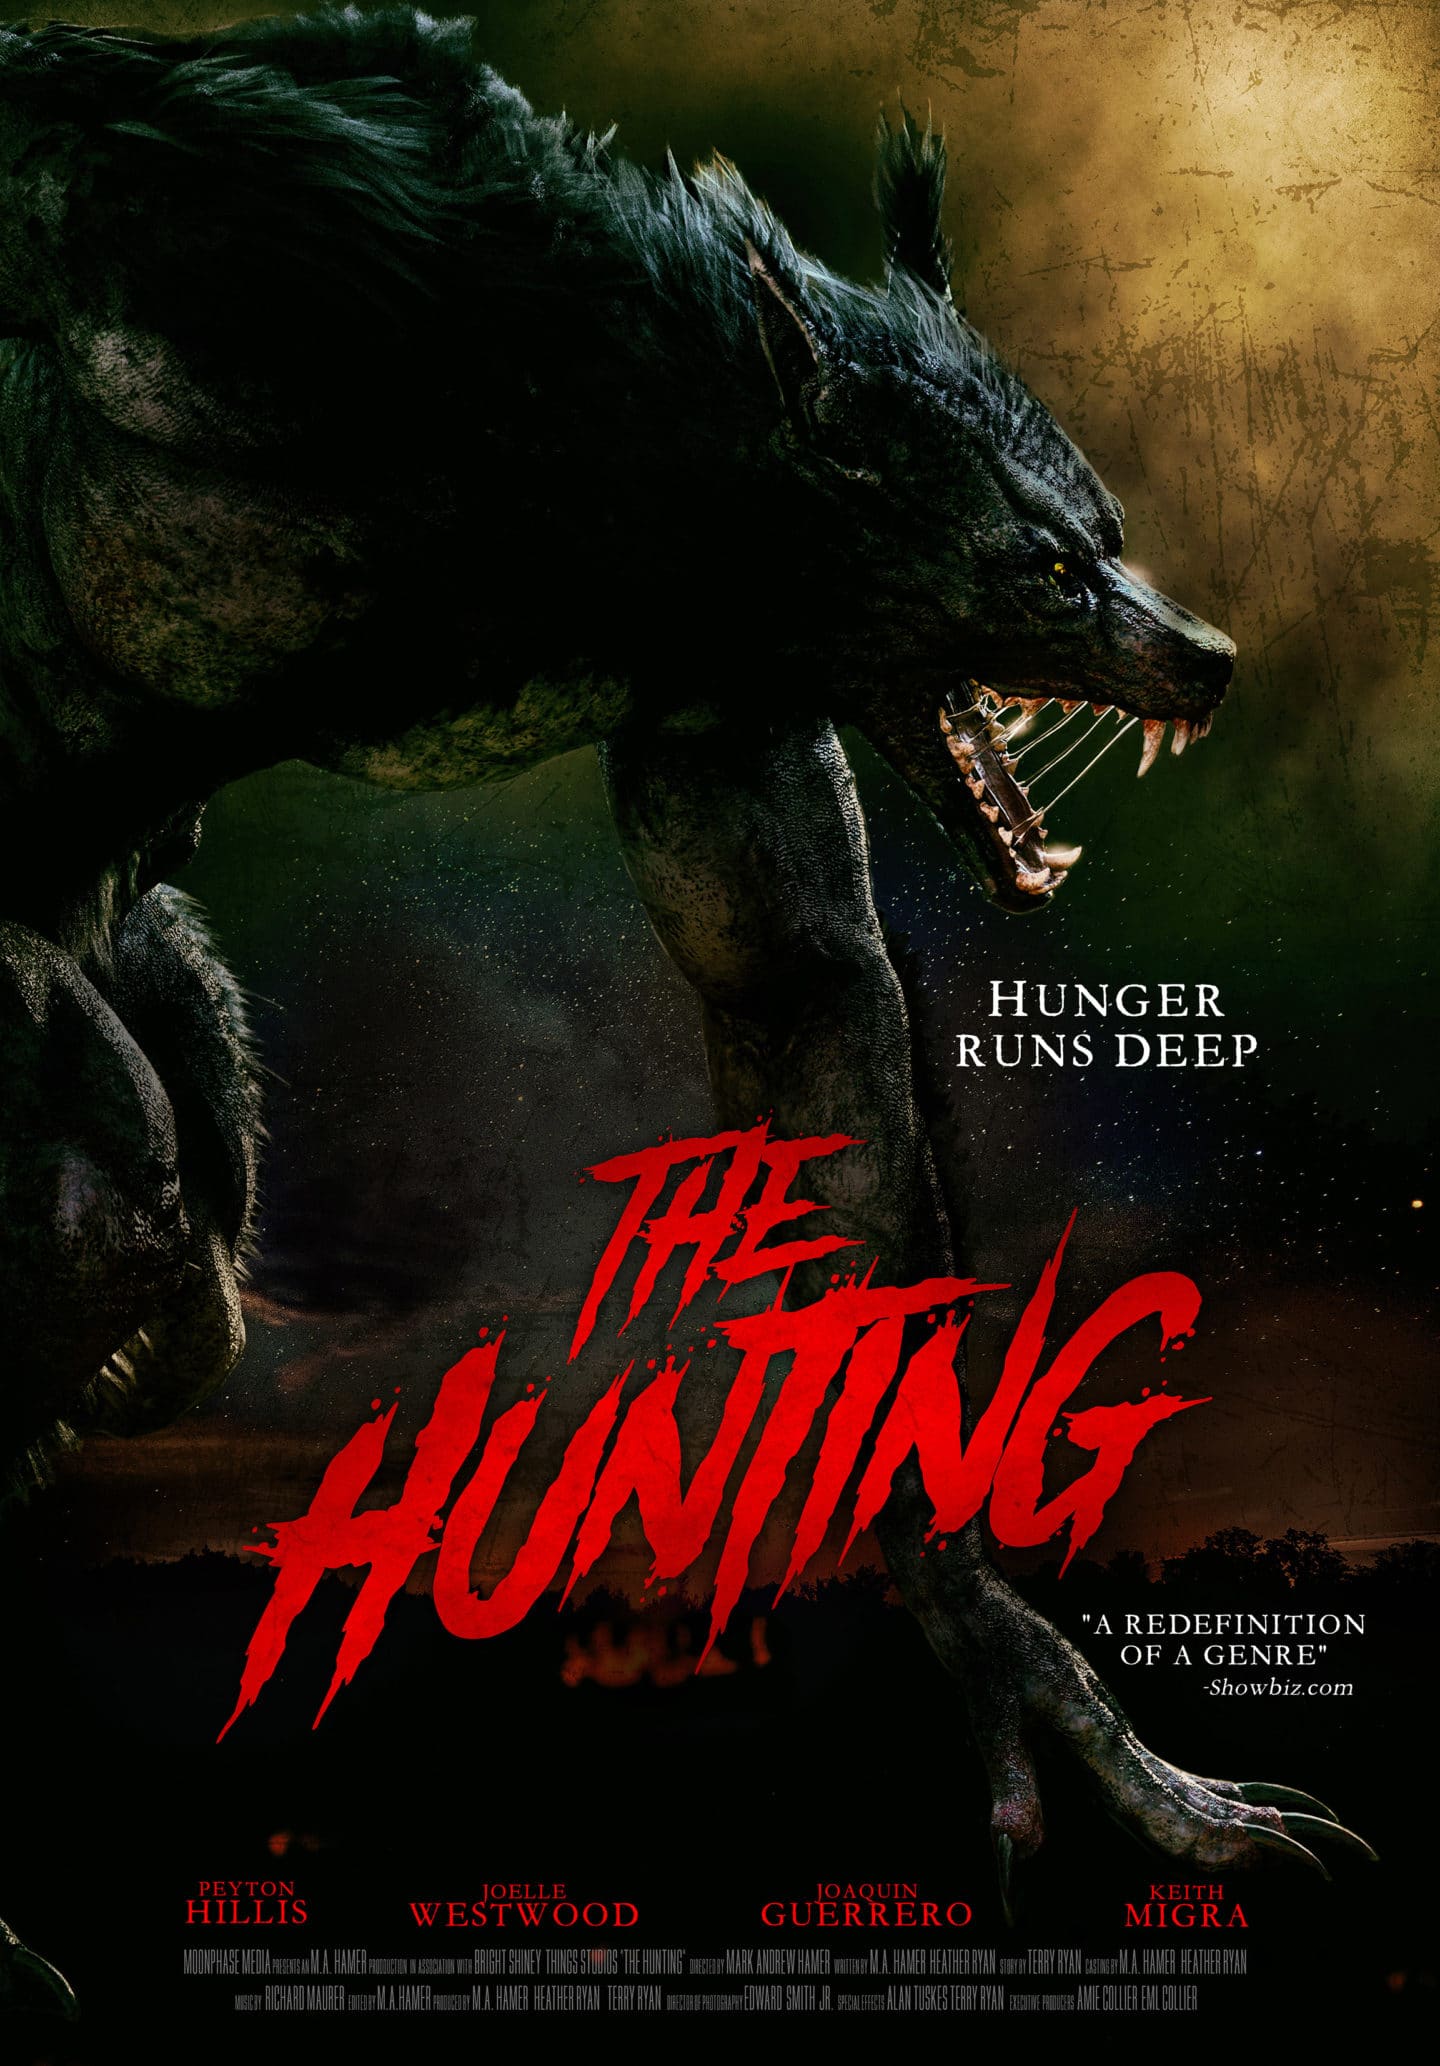 The Hunting – Teaser Poster